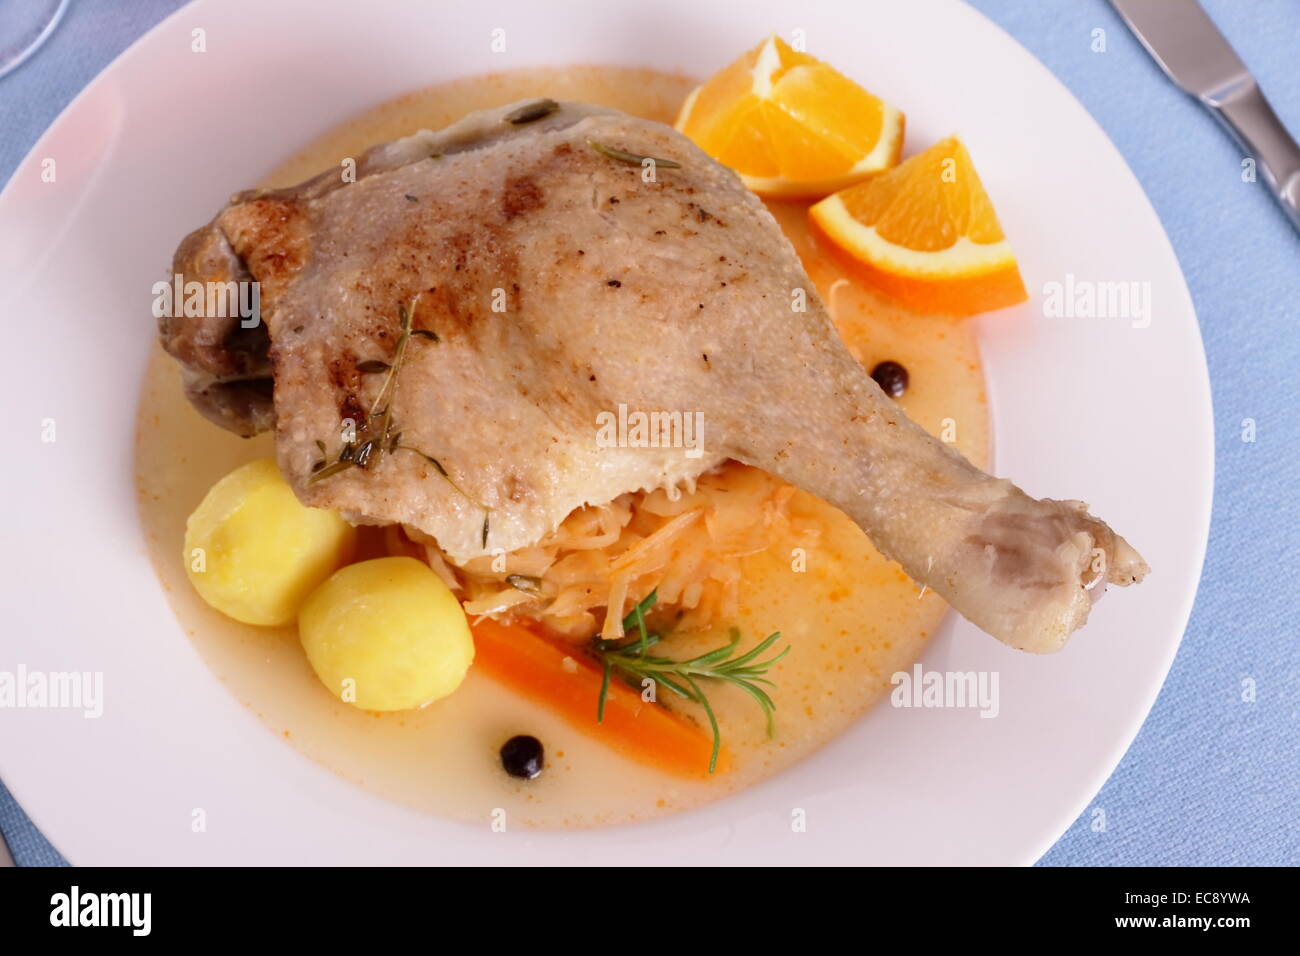 Duck leg with braised cabbage, potato and gravy, top view, close up Stock Photo